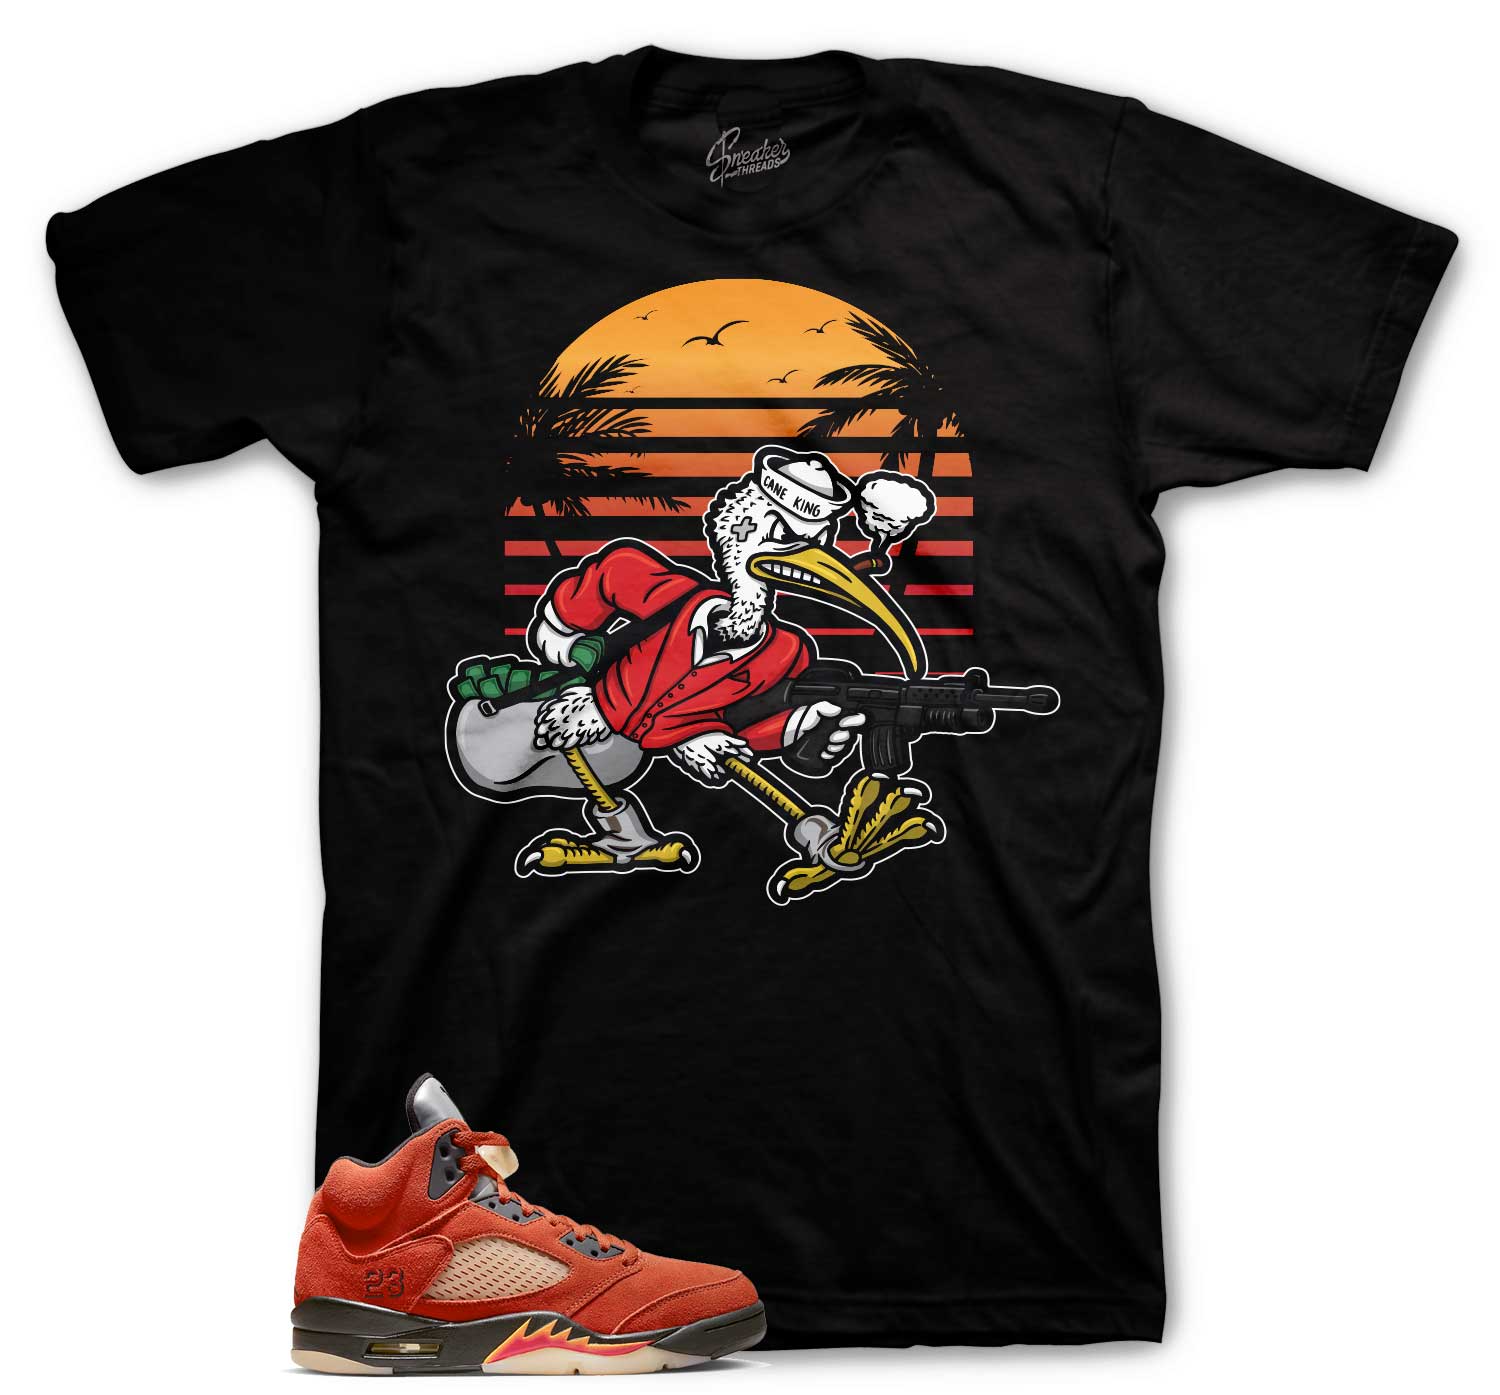 Retro 5 Mars For Her Shirt - By Any Means - Black